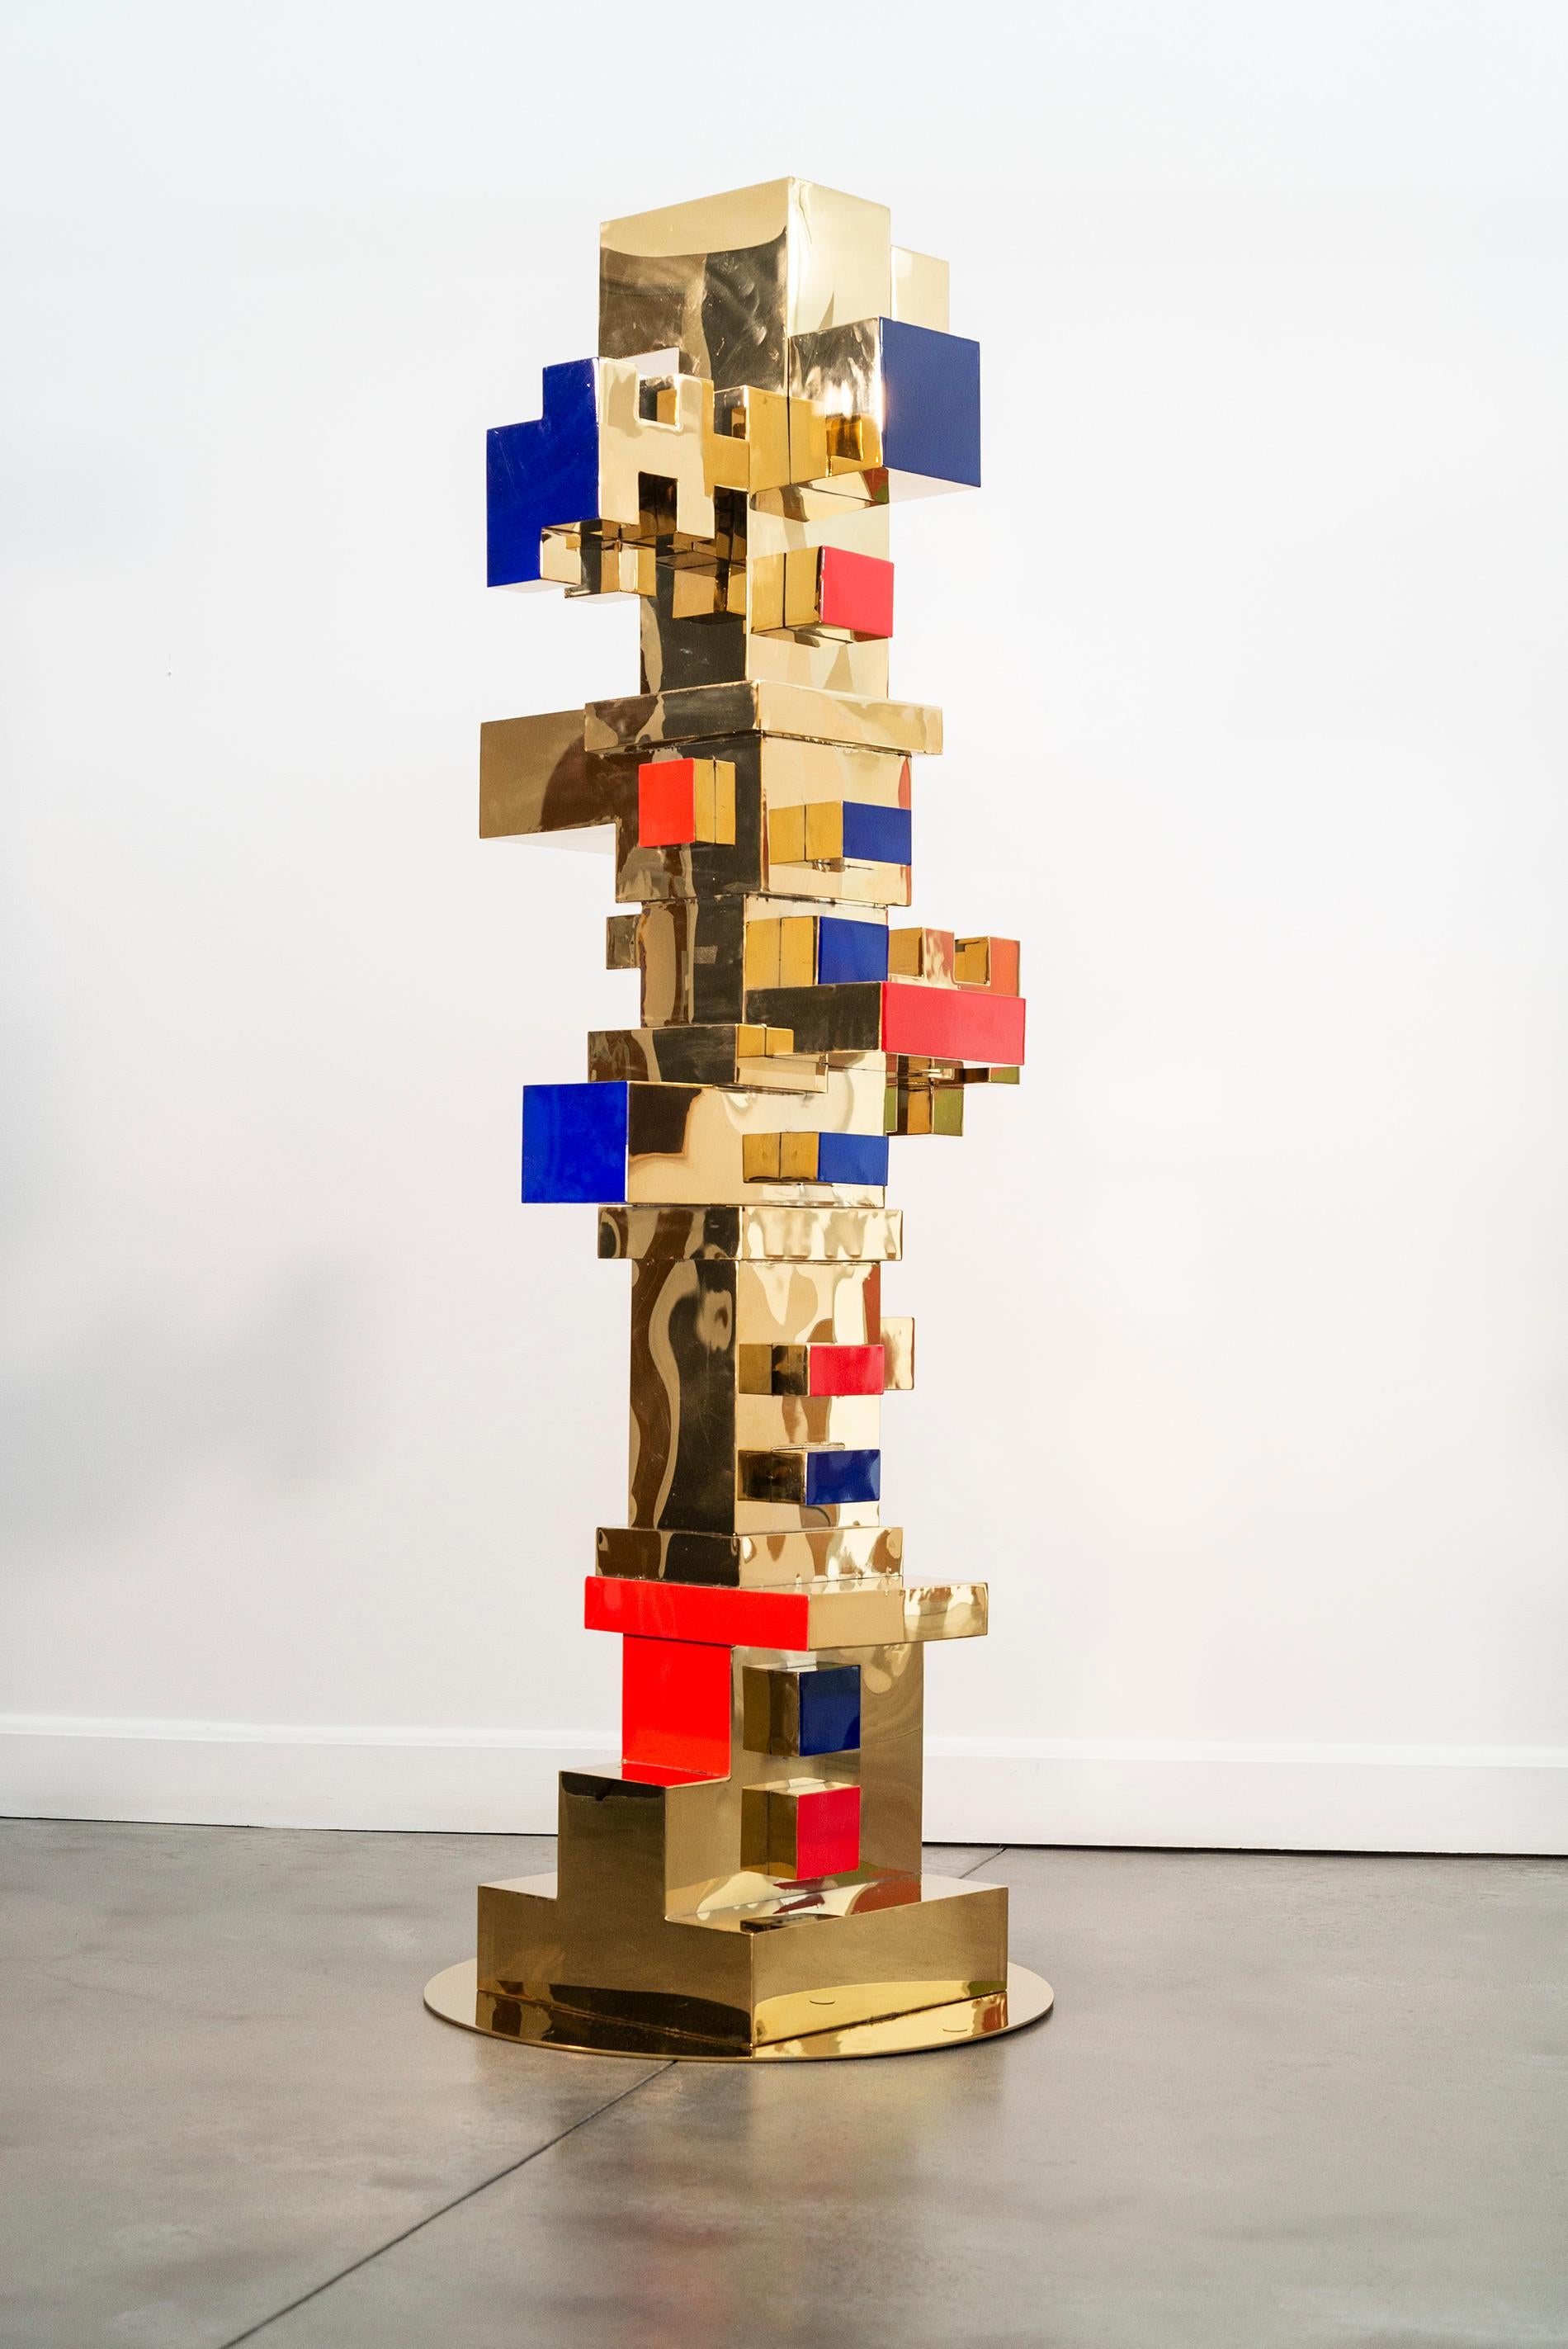 Stacked Blocks - Gold, Red, Blue - totem, gold plated, stainless steel sculpture